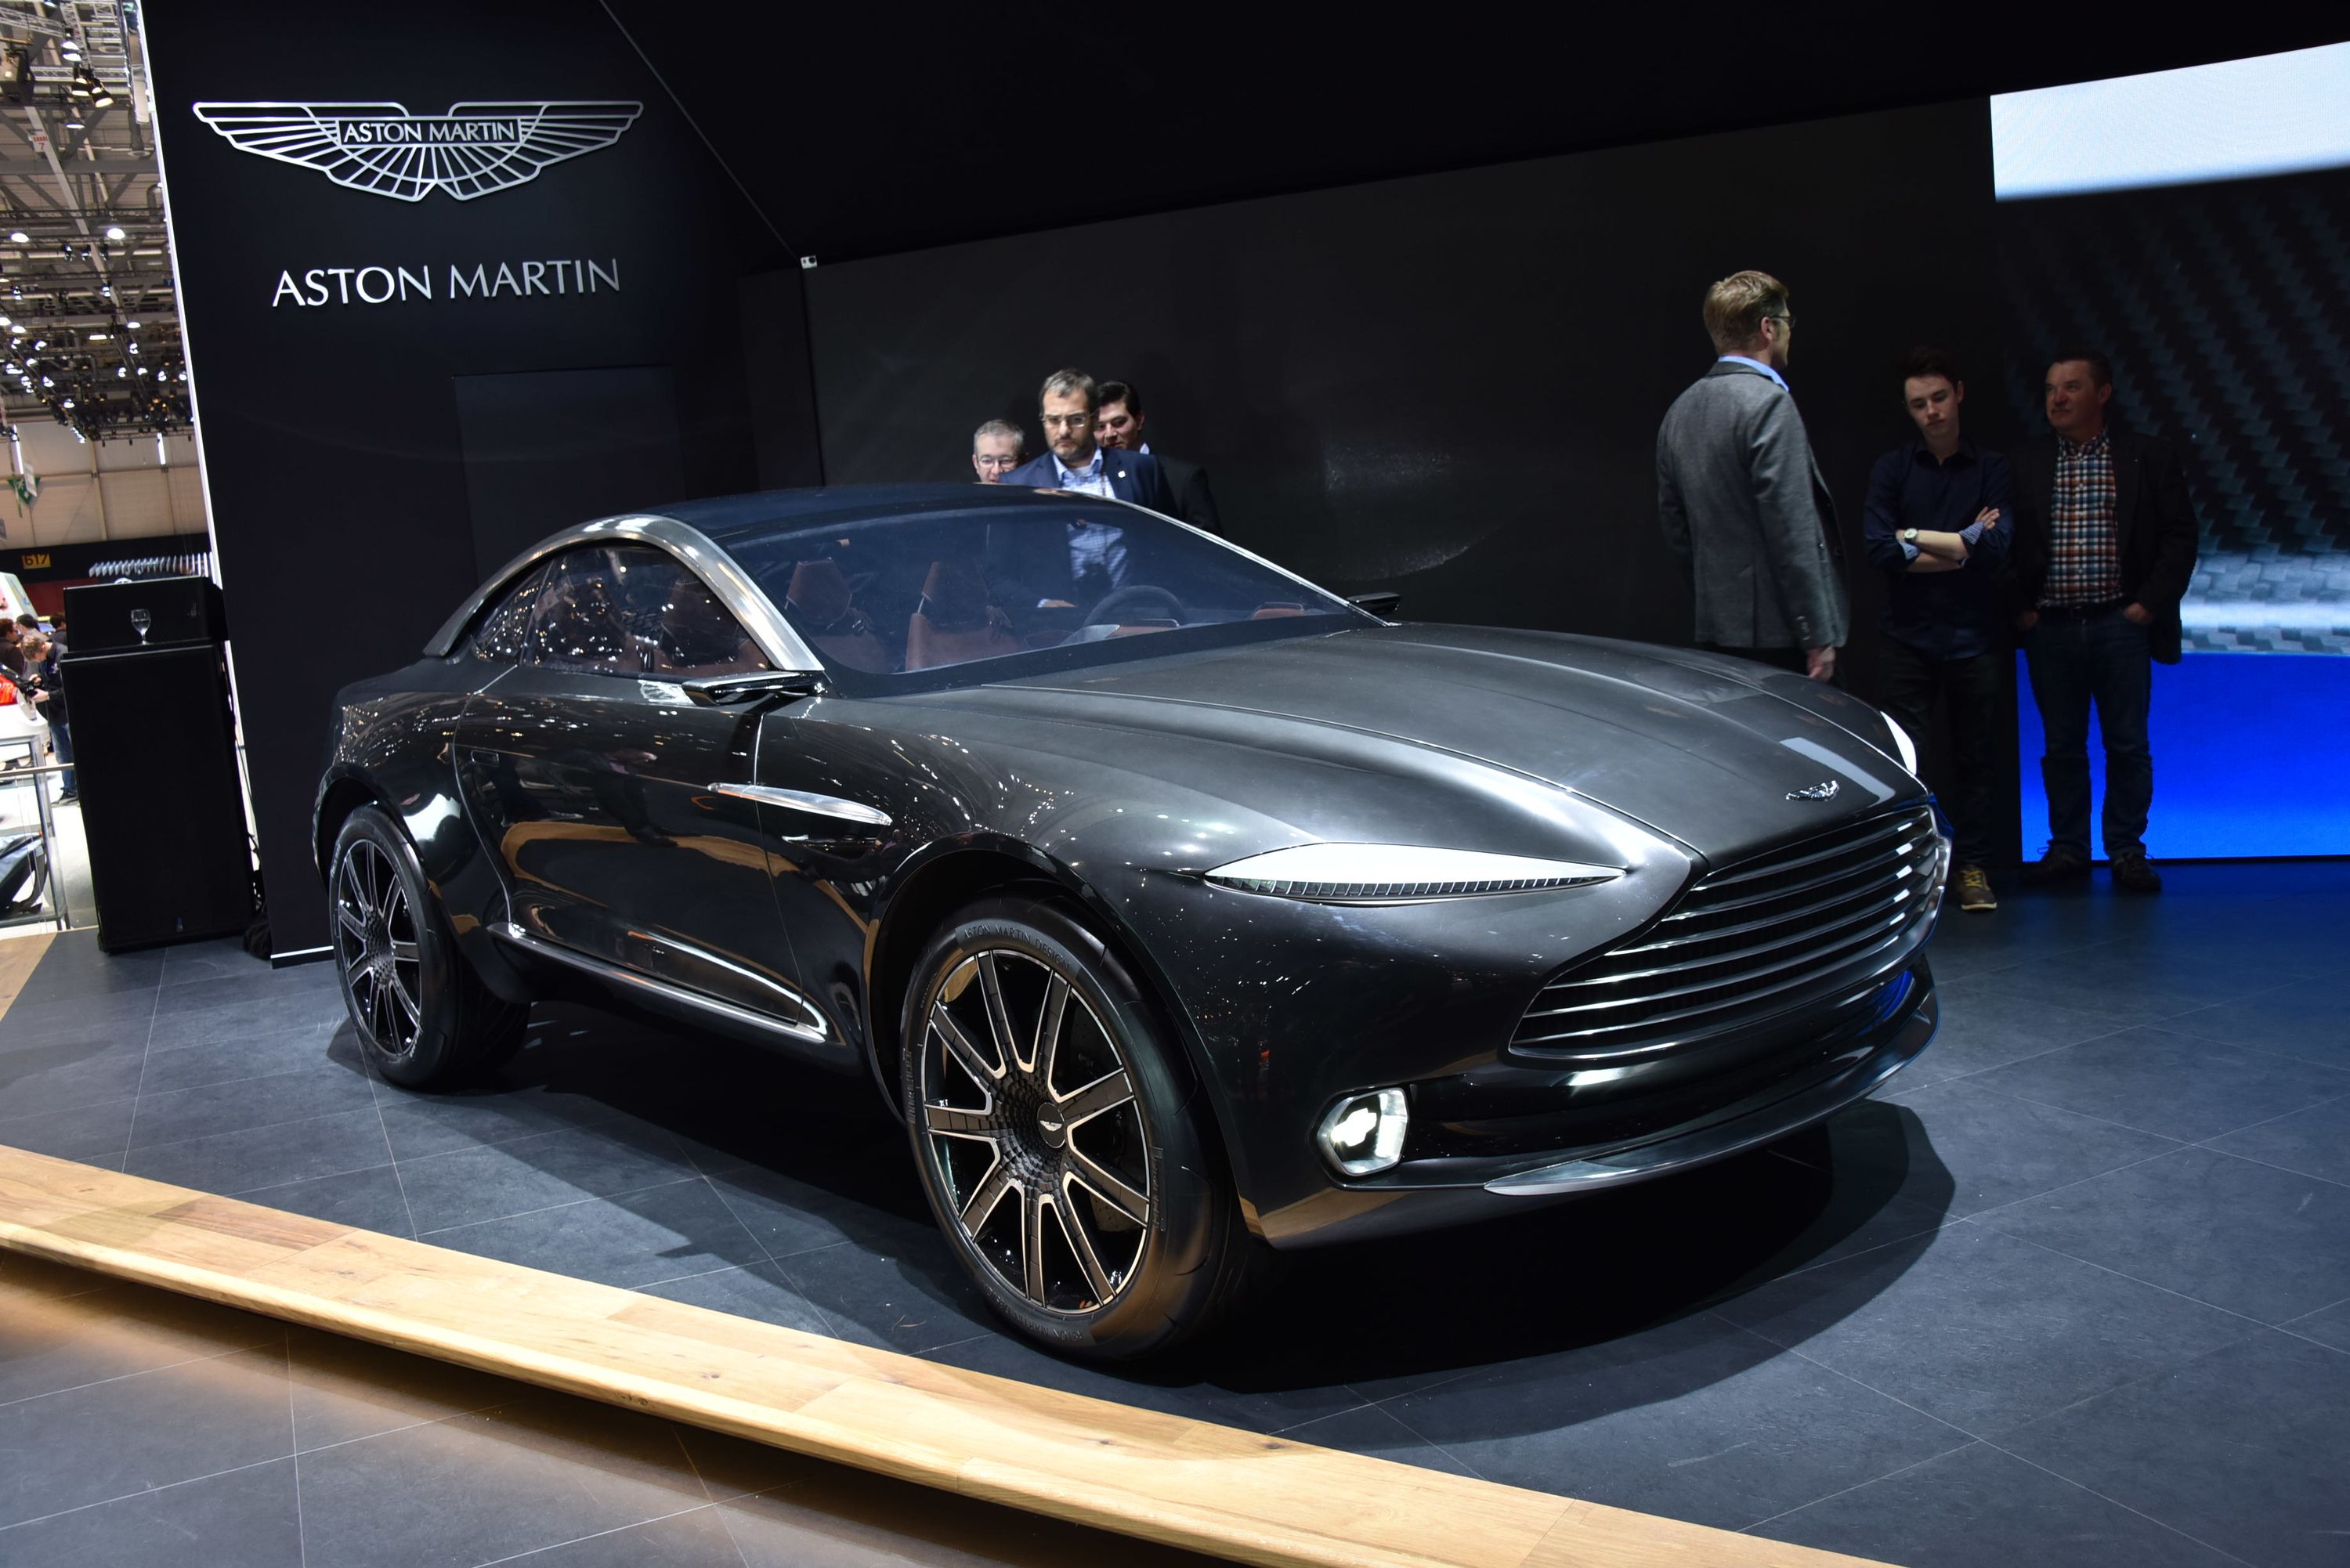 The all-electric Aston Martin DBX concept: traverse Fury Road in